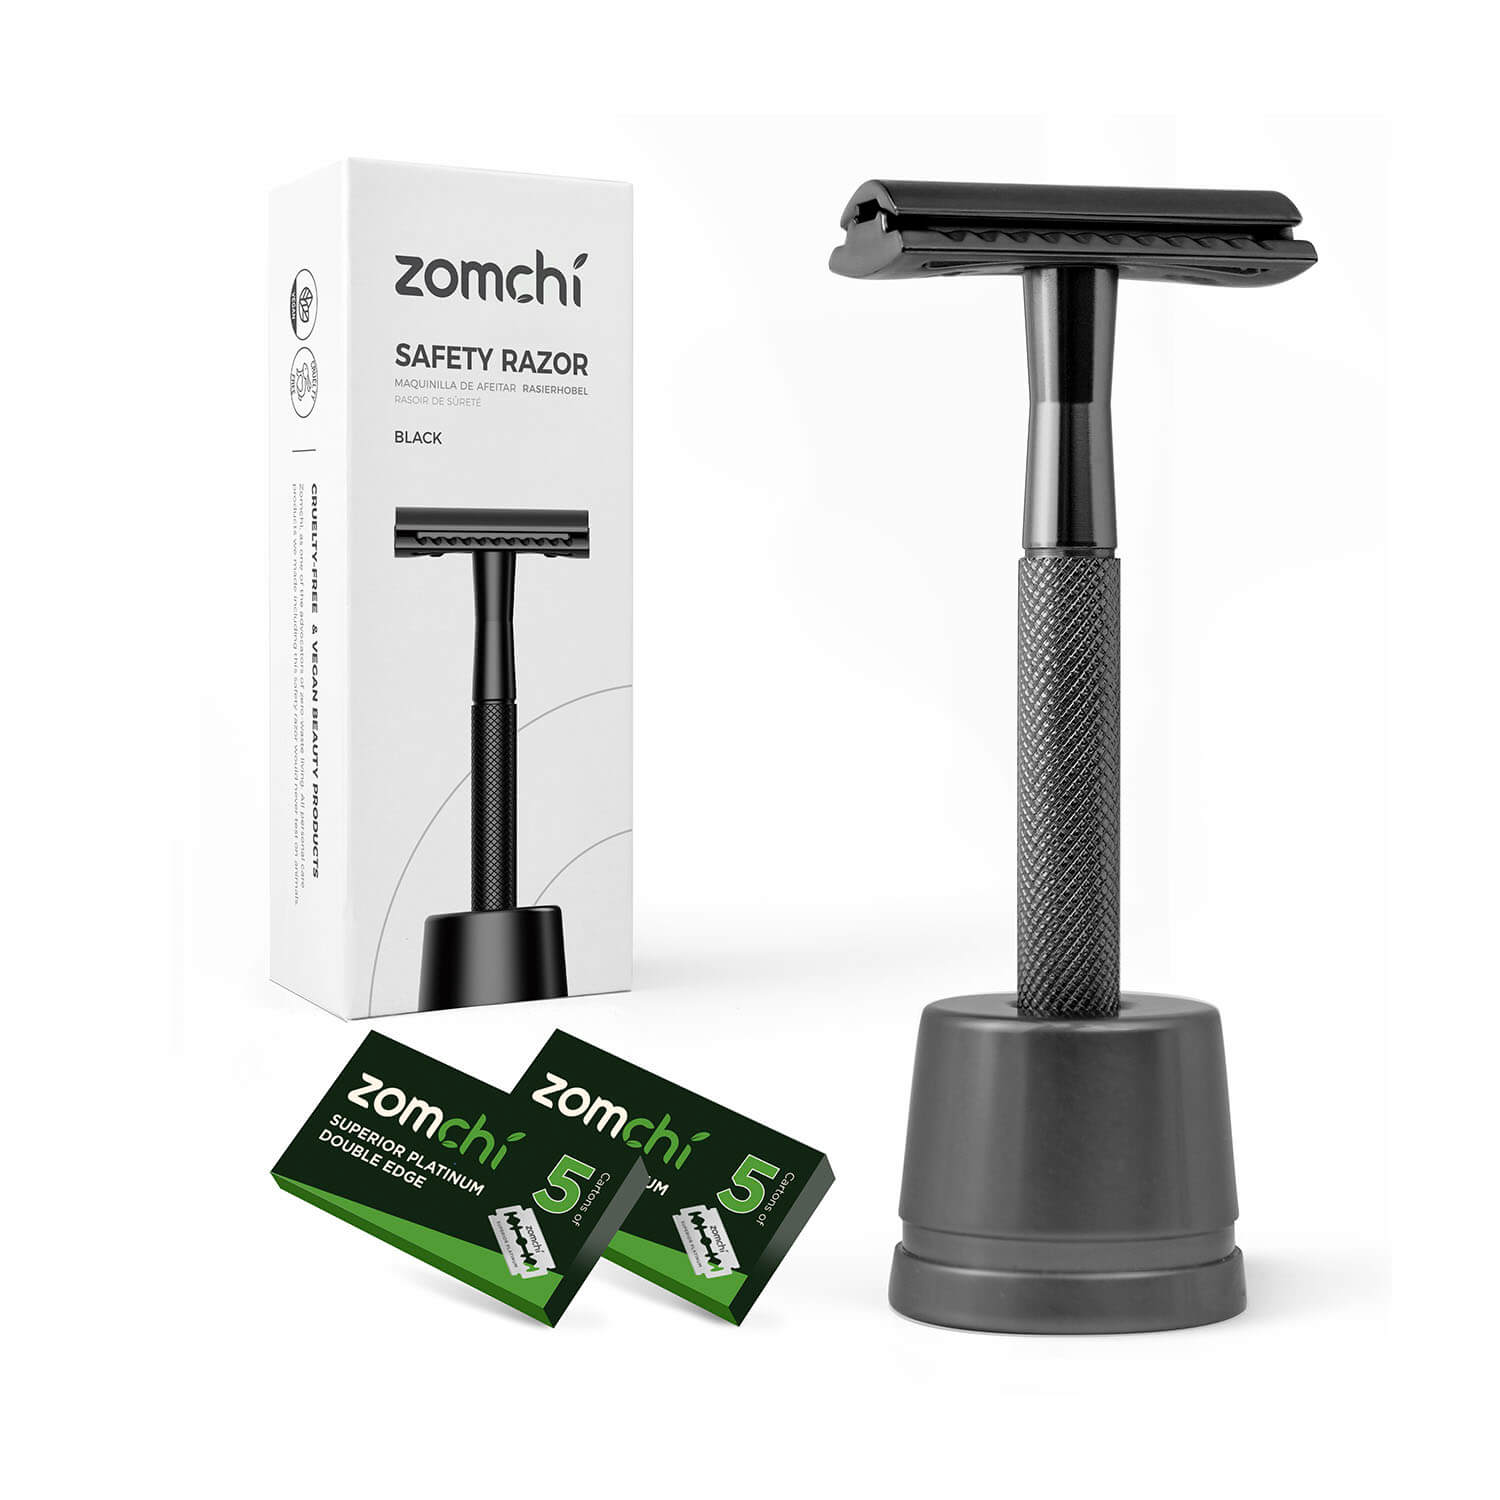 Zomchi Black Safety Razor With Stand And 10 Counts Blades